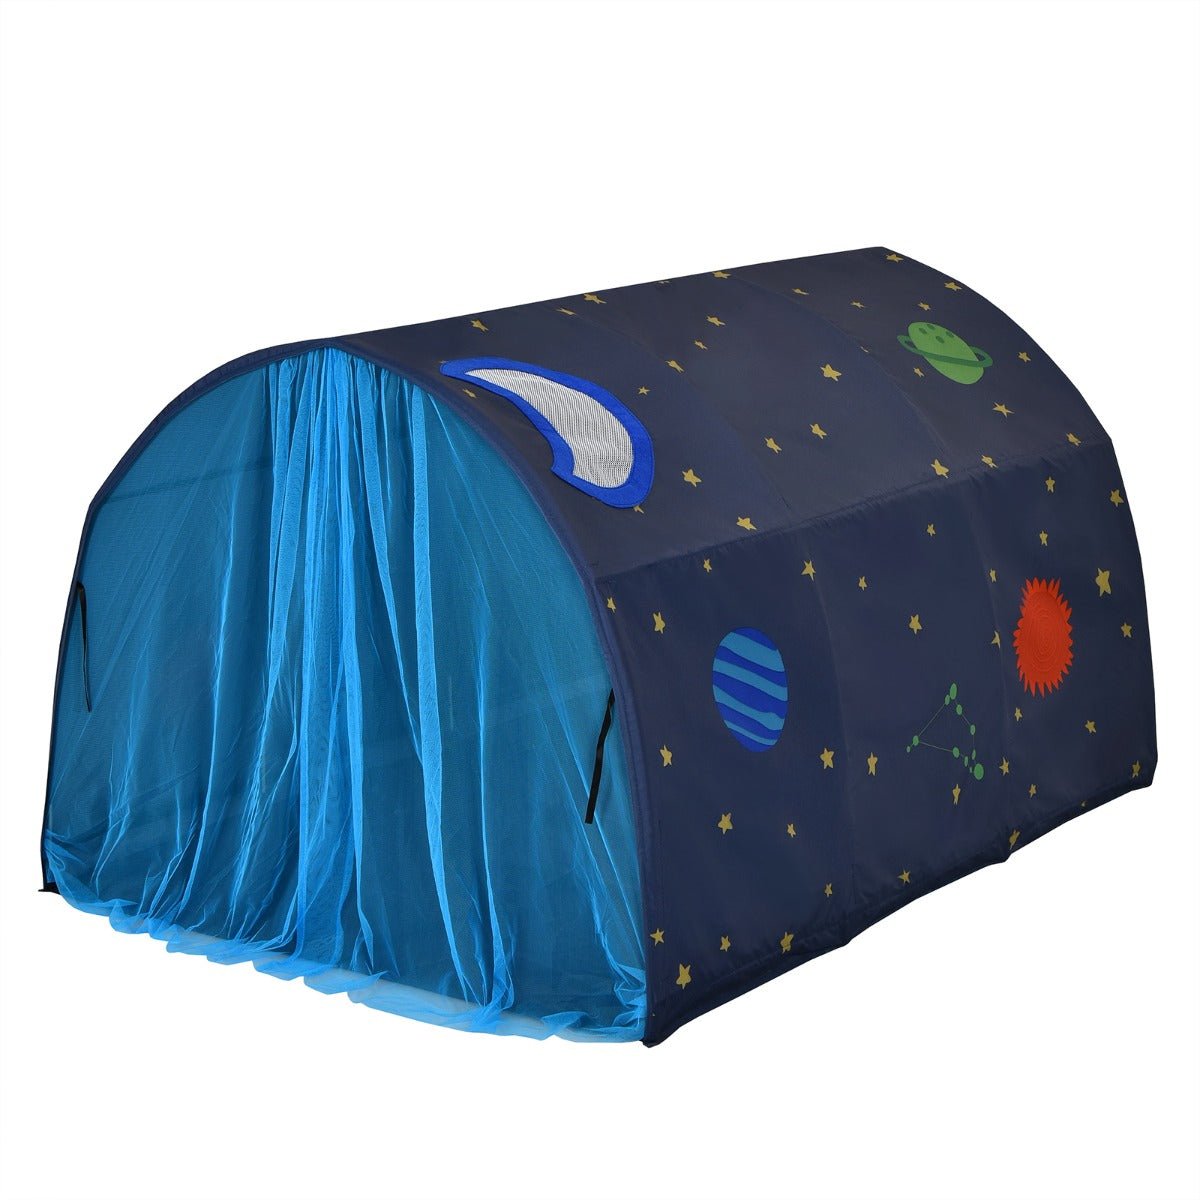 Snug Sleepover Haven: Twin Kids Tent Playhouse with Carry Bag